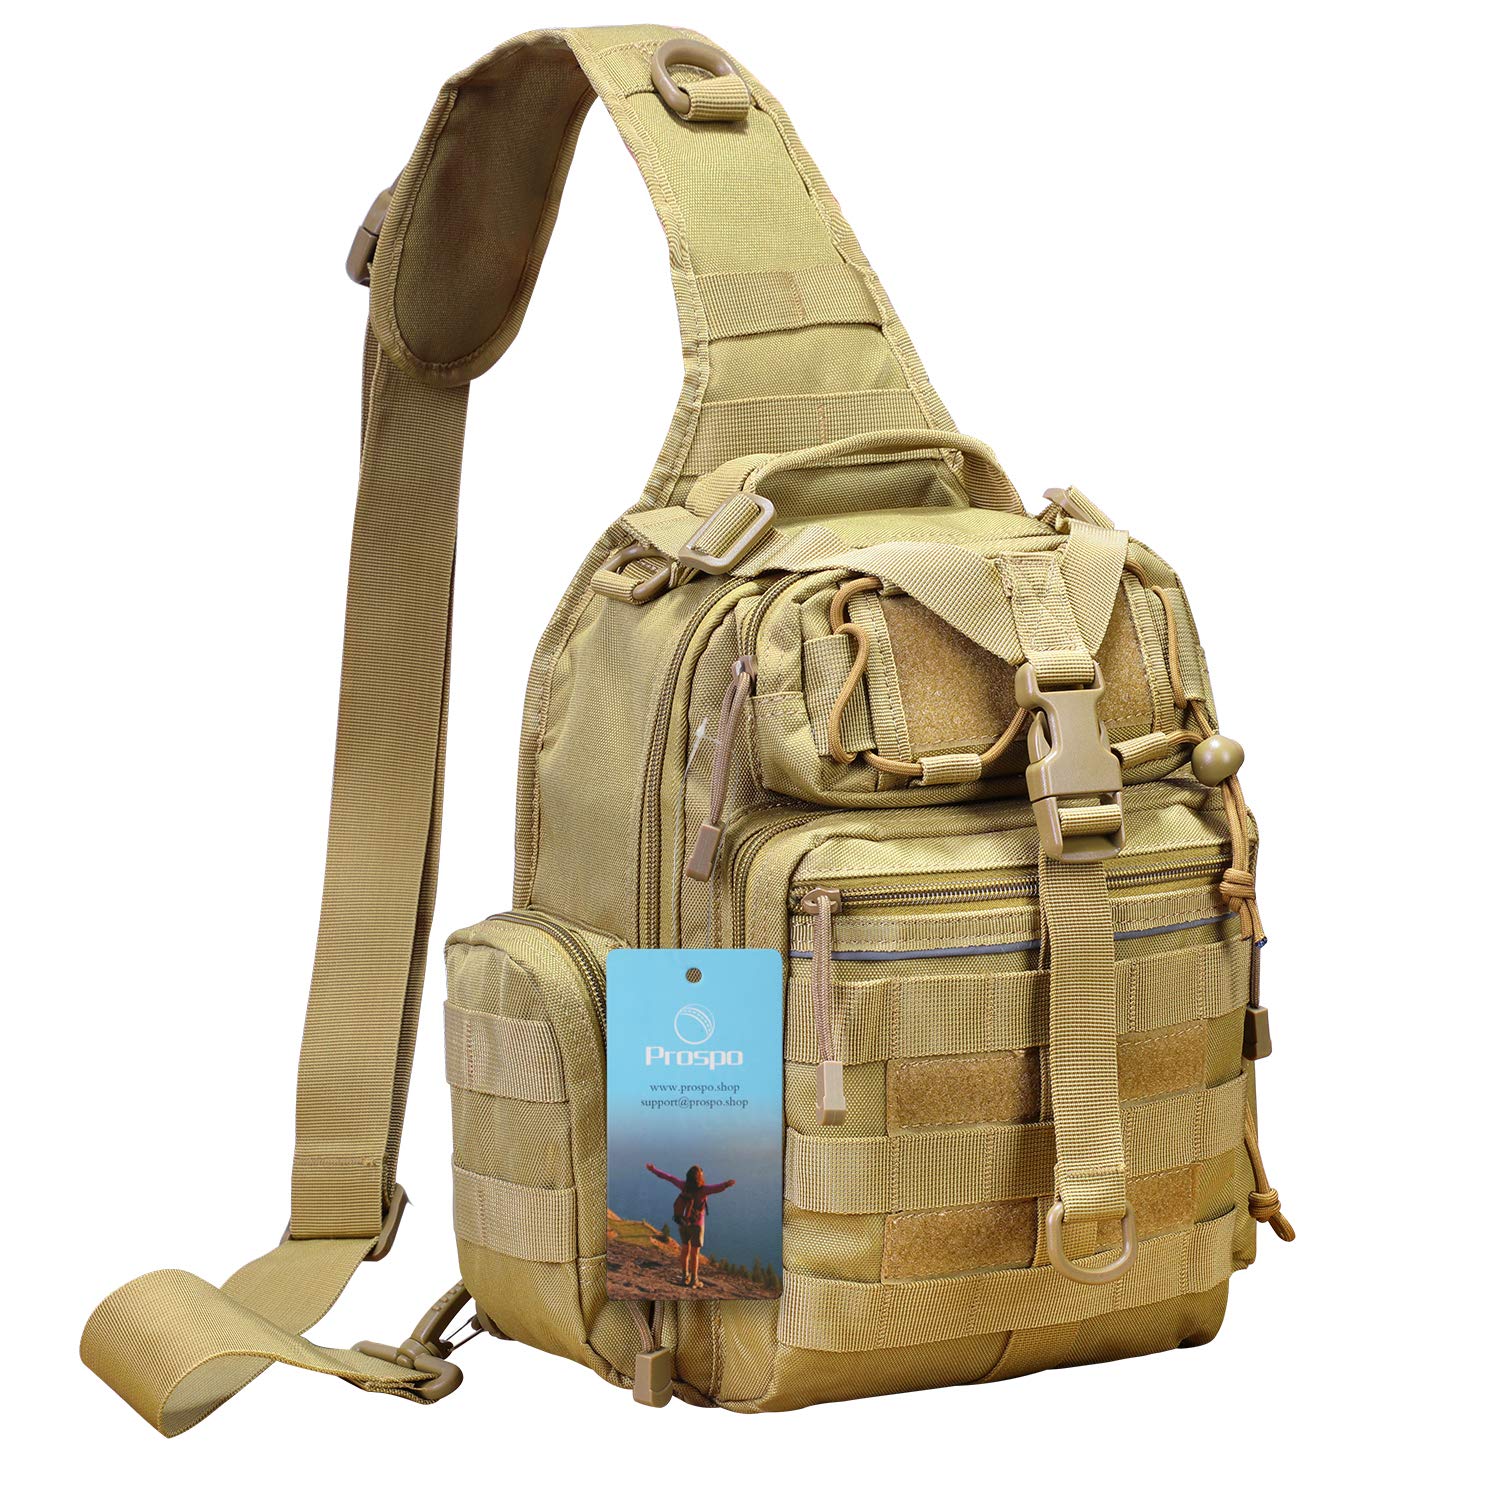 Tactical Military Compact Shoulder Sling Backpack | Paul Smith